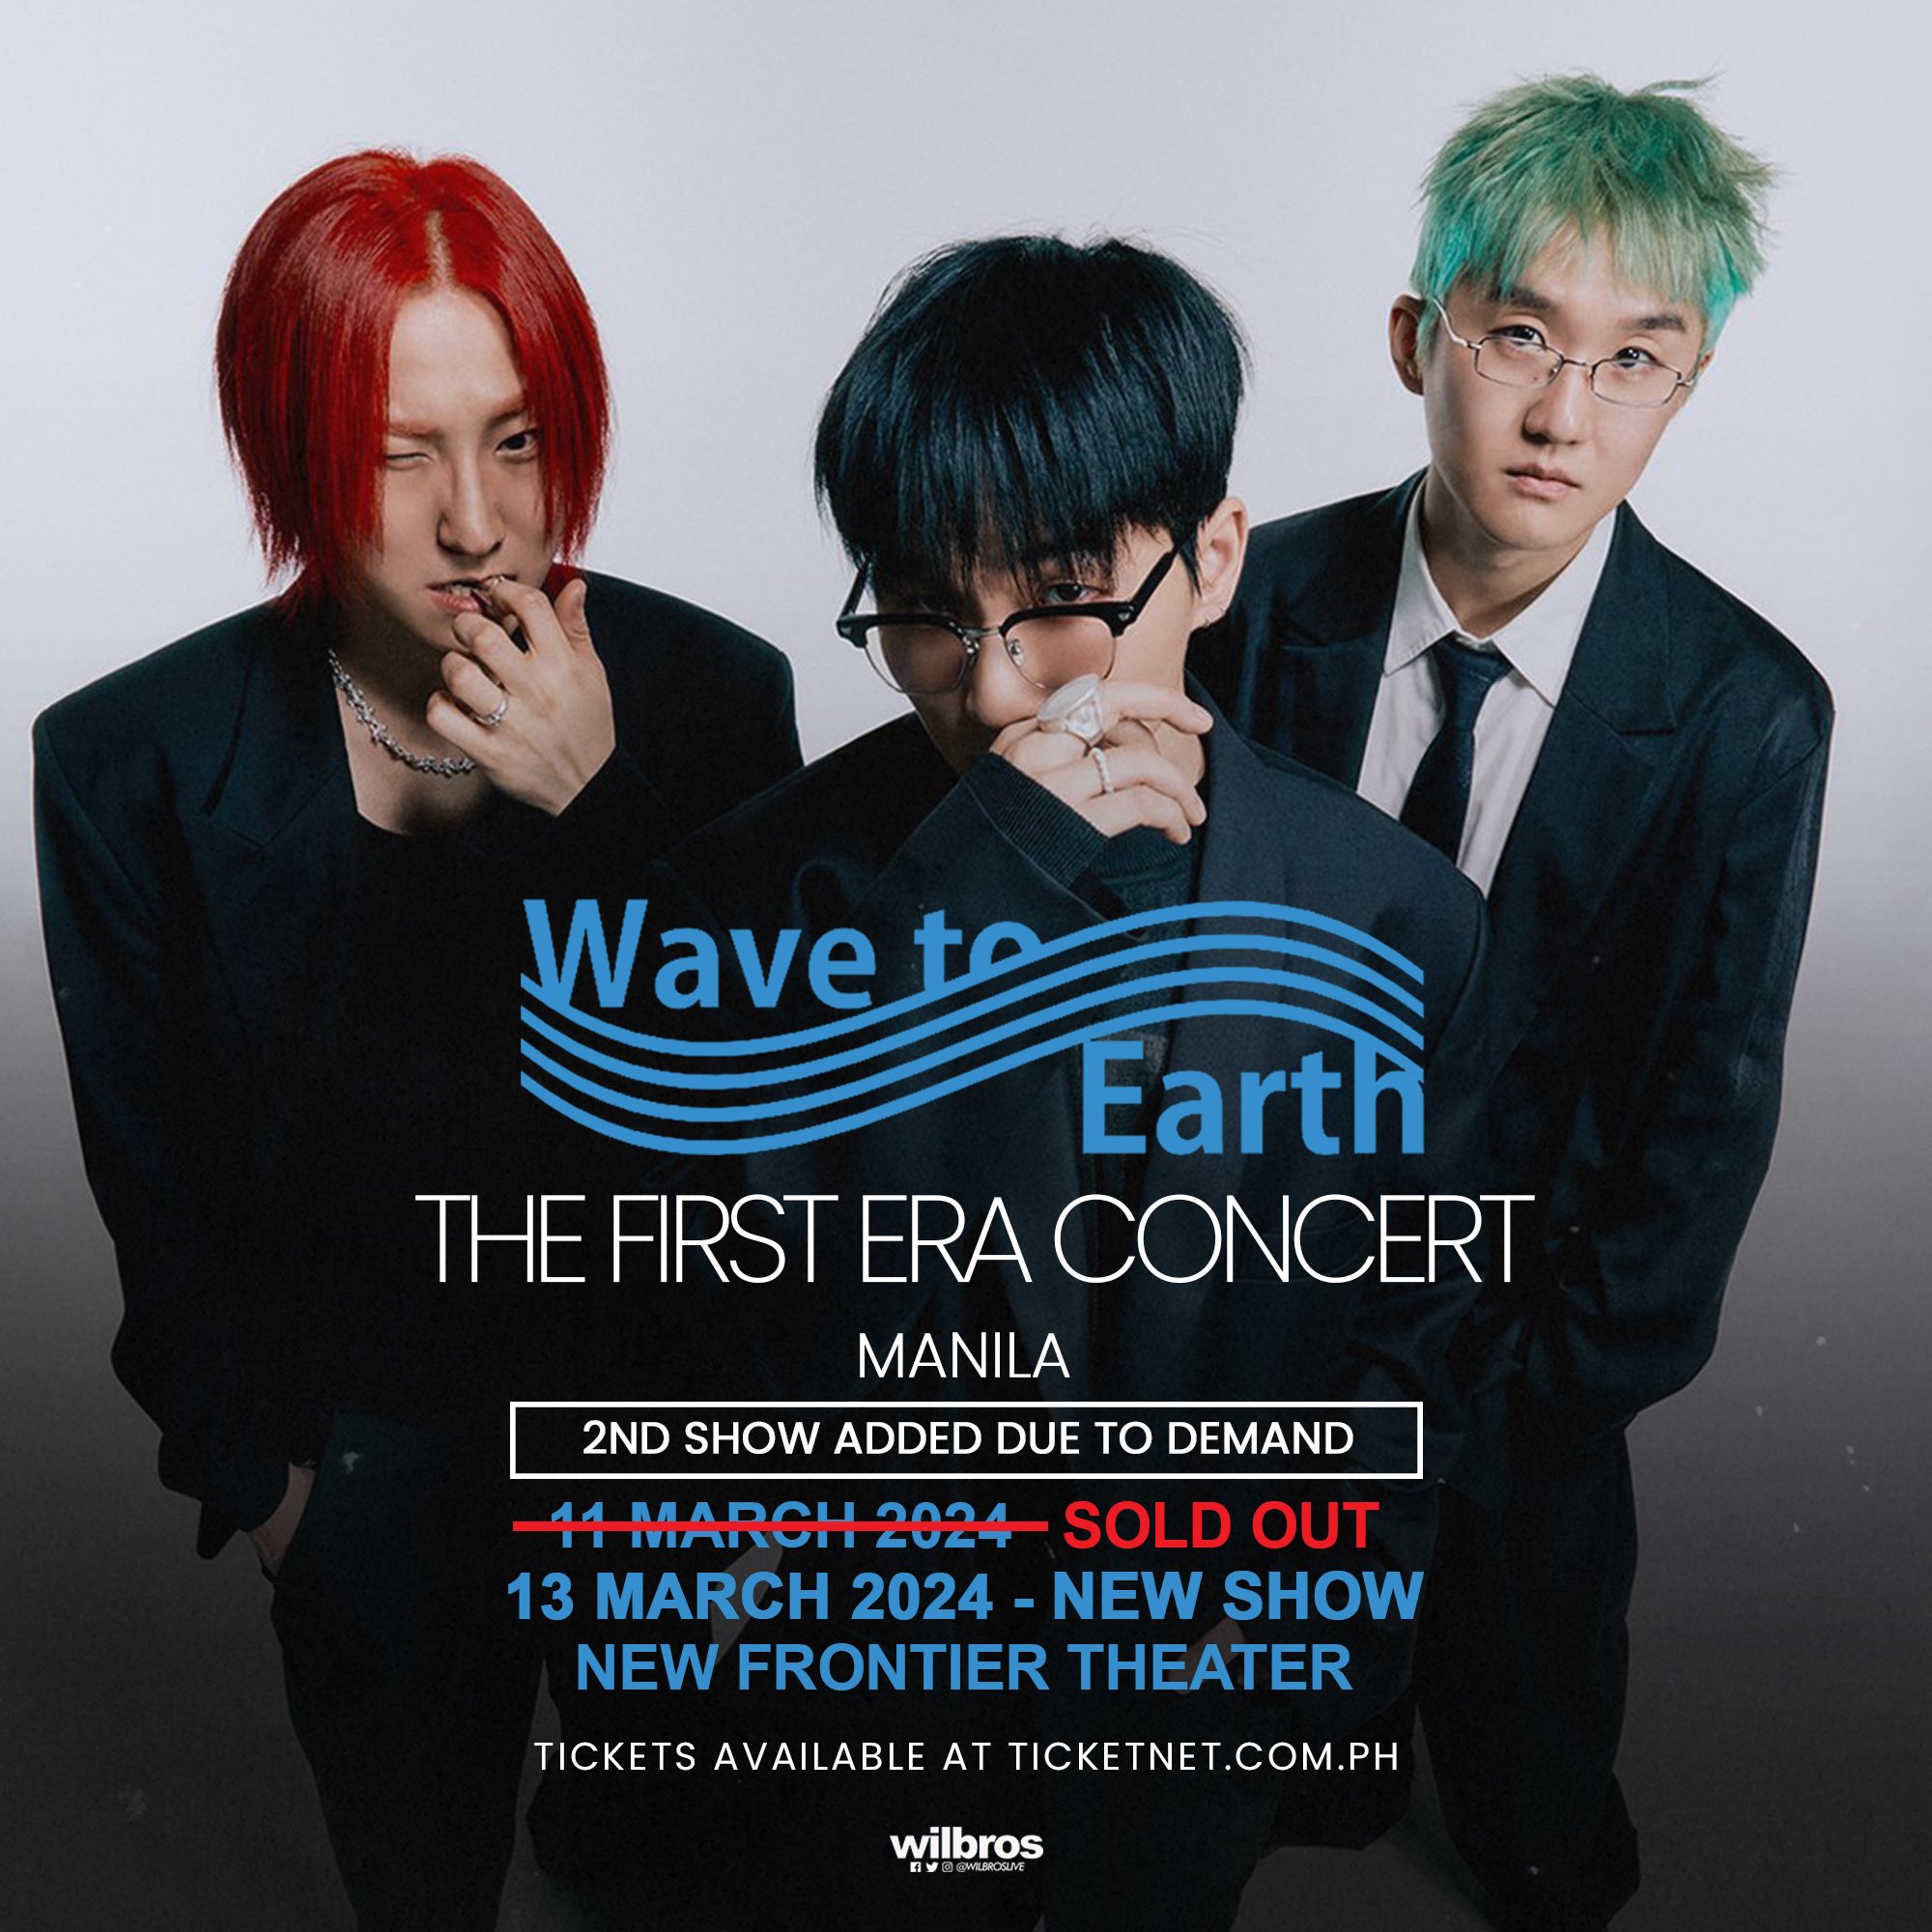 WAVE TO EARTH The First Era Concert